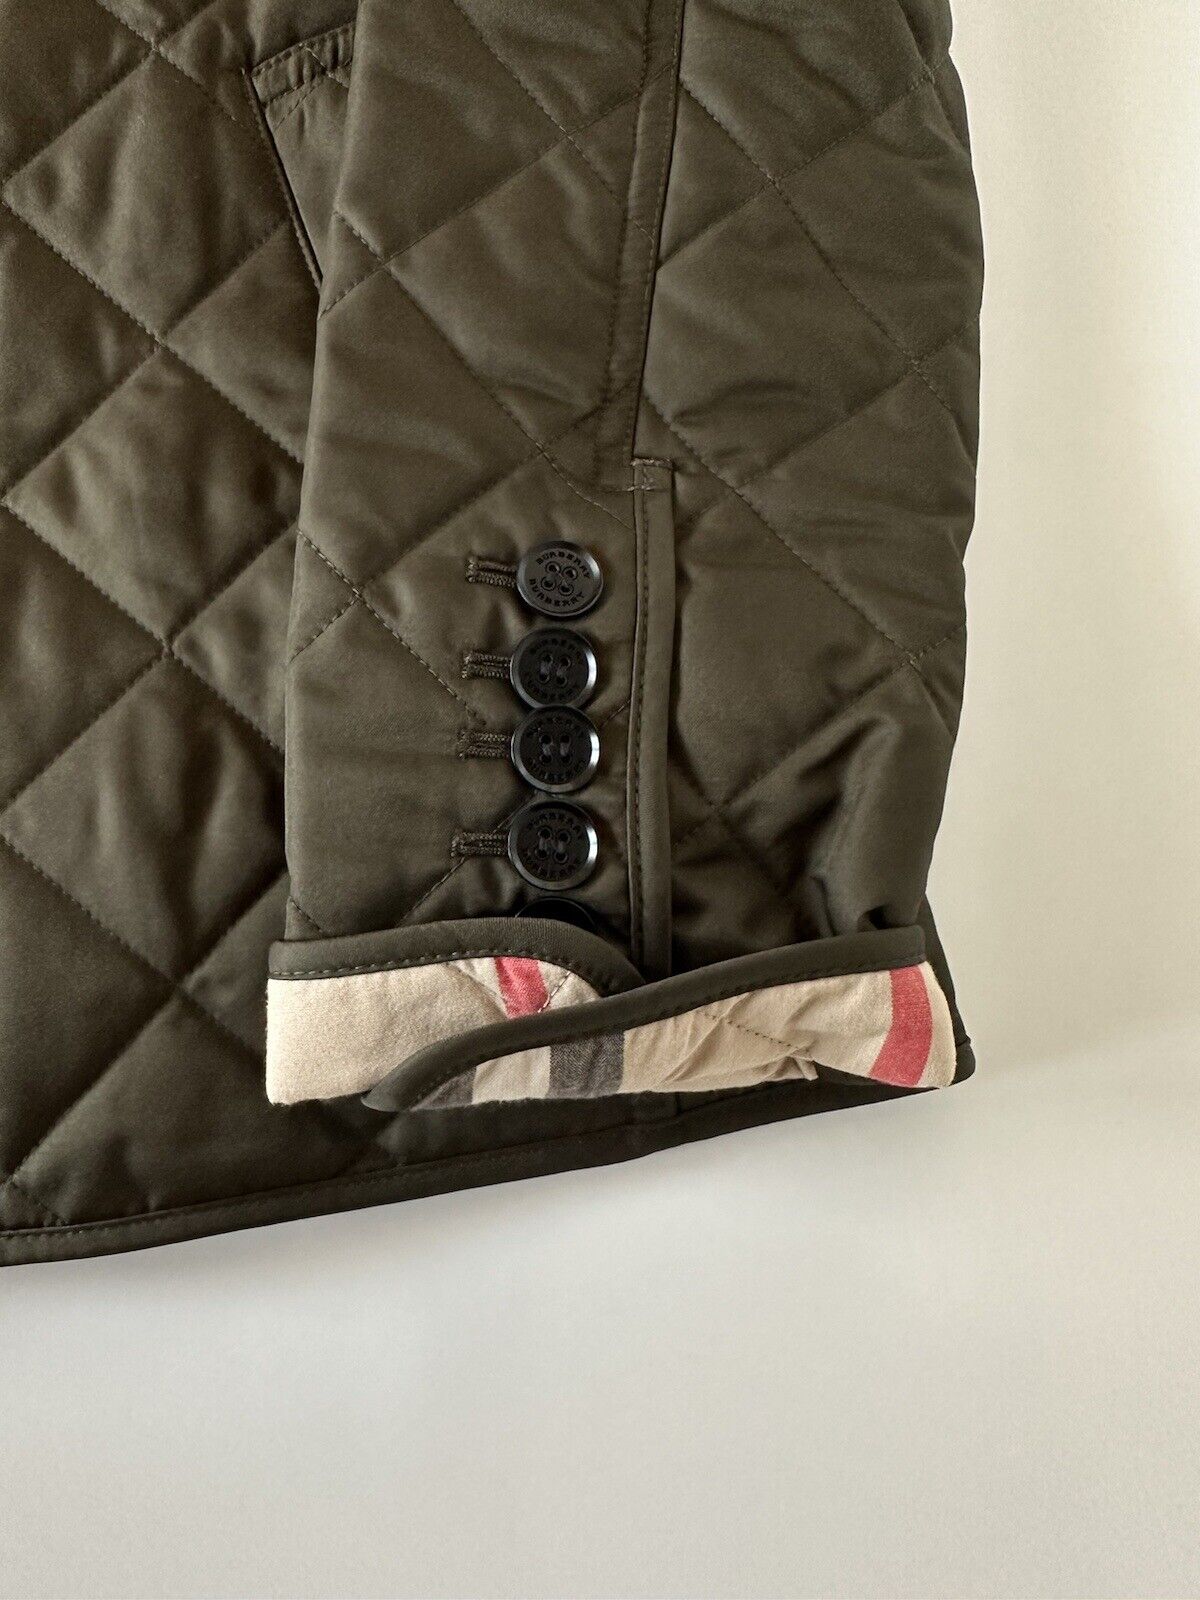 NWT $960 Burberry Women's Quilted Diamond Dark Olive Jacket  Large 8065873